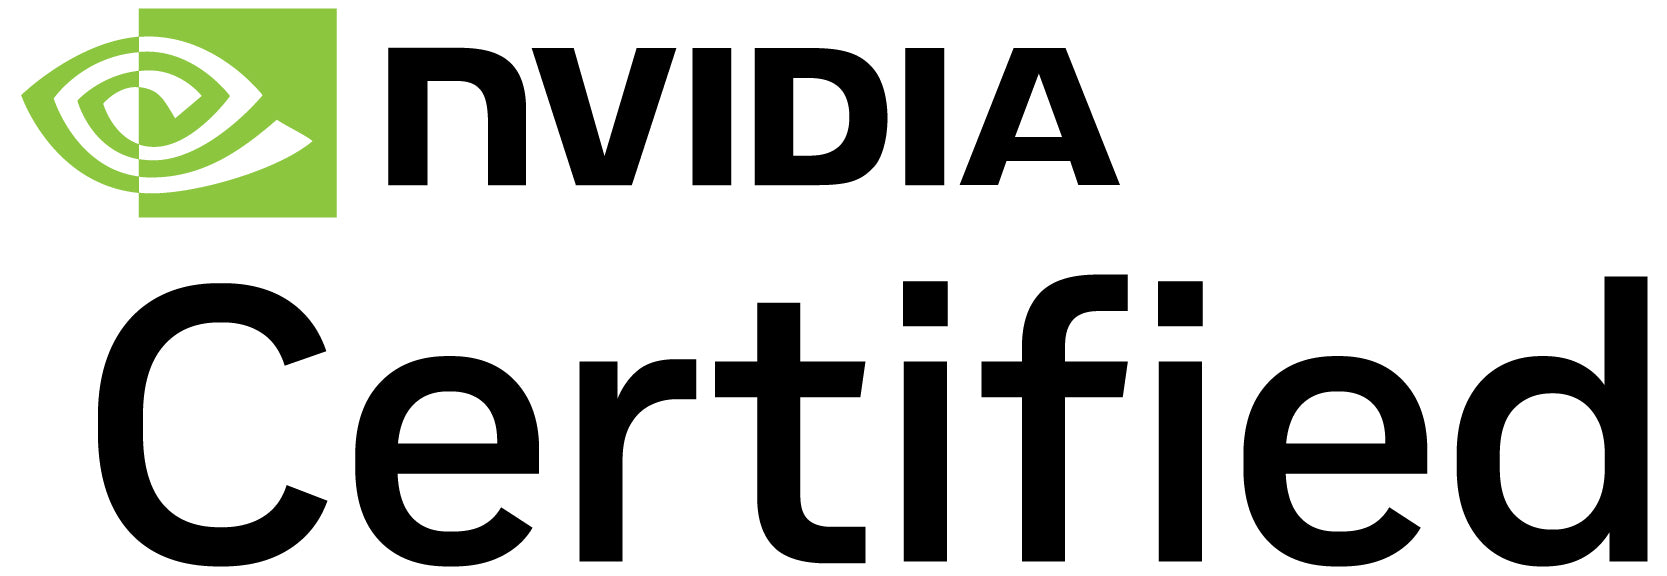 NVIDIA Certified